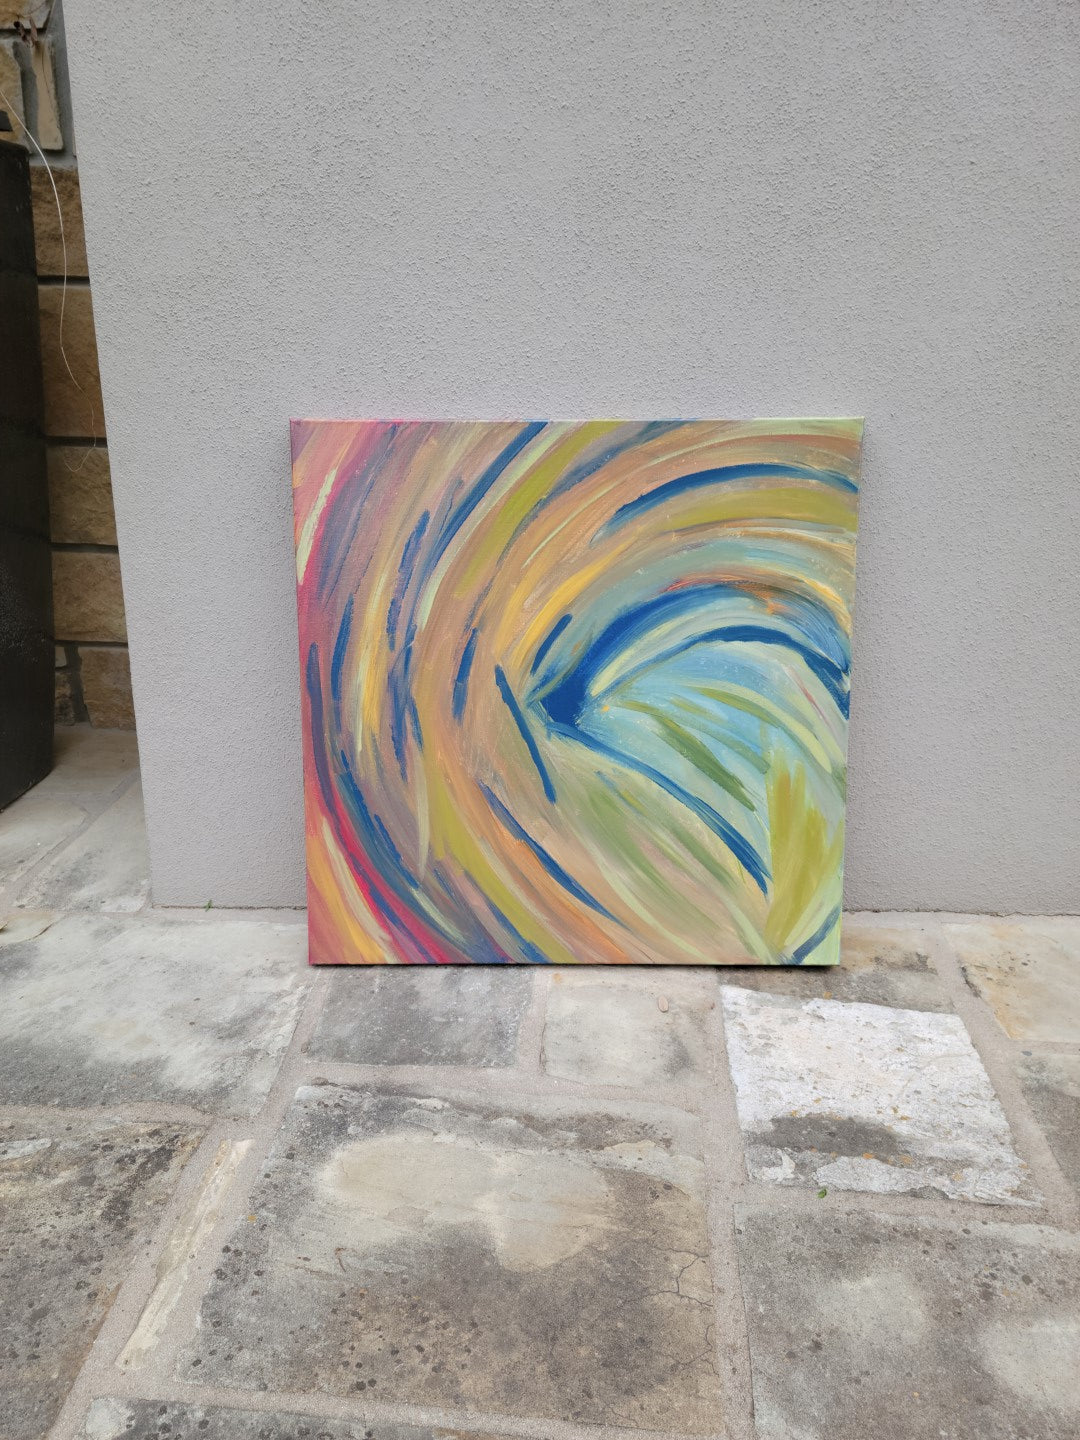 Desolation Tragedy - Original Abstract Painting in Austin Texas 24" x 24"